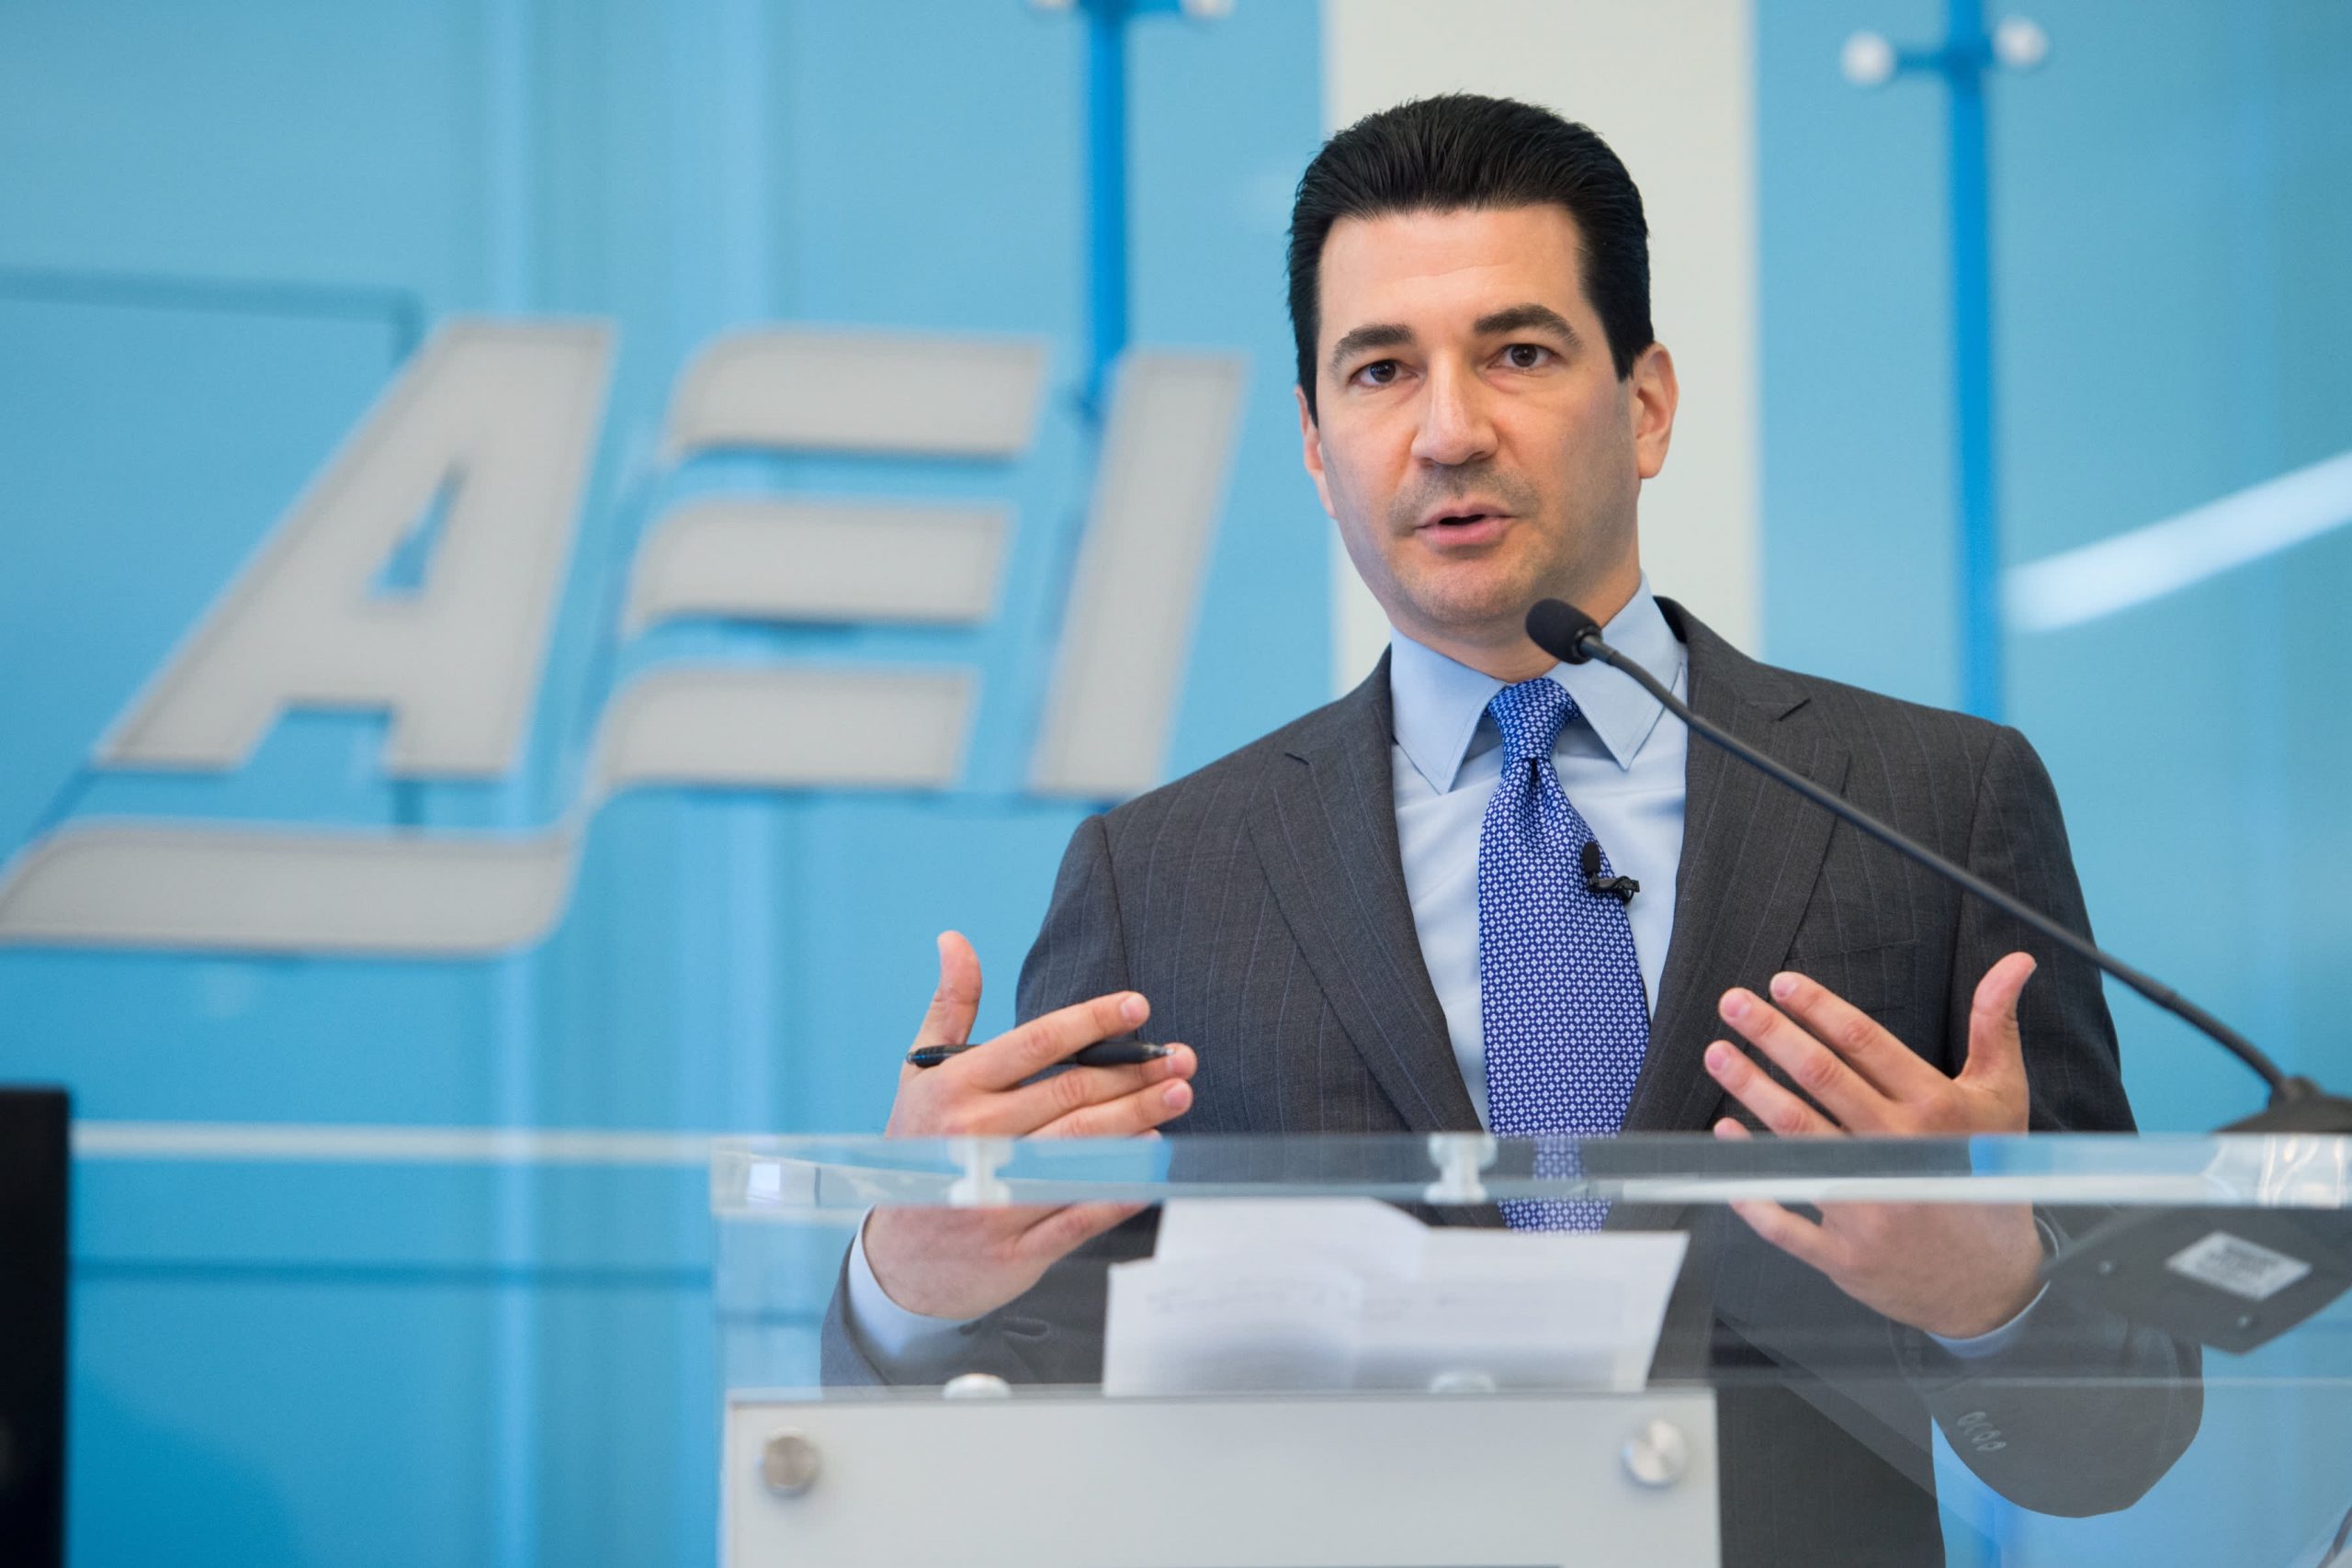 100 million in U.S. shall be inoculated by April, Gottlieb says